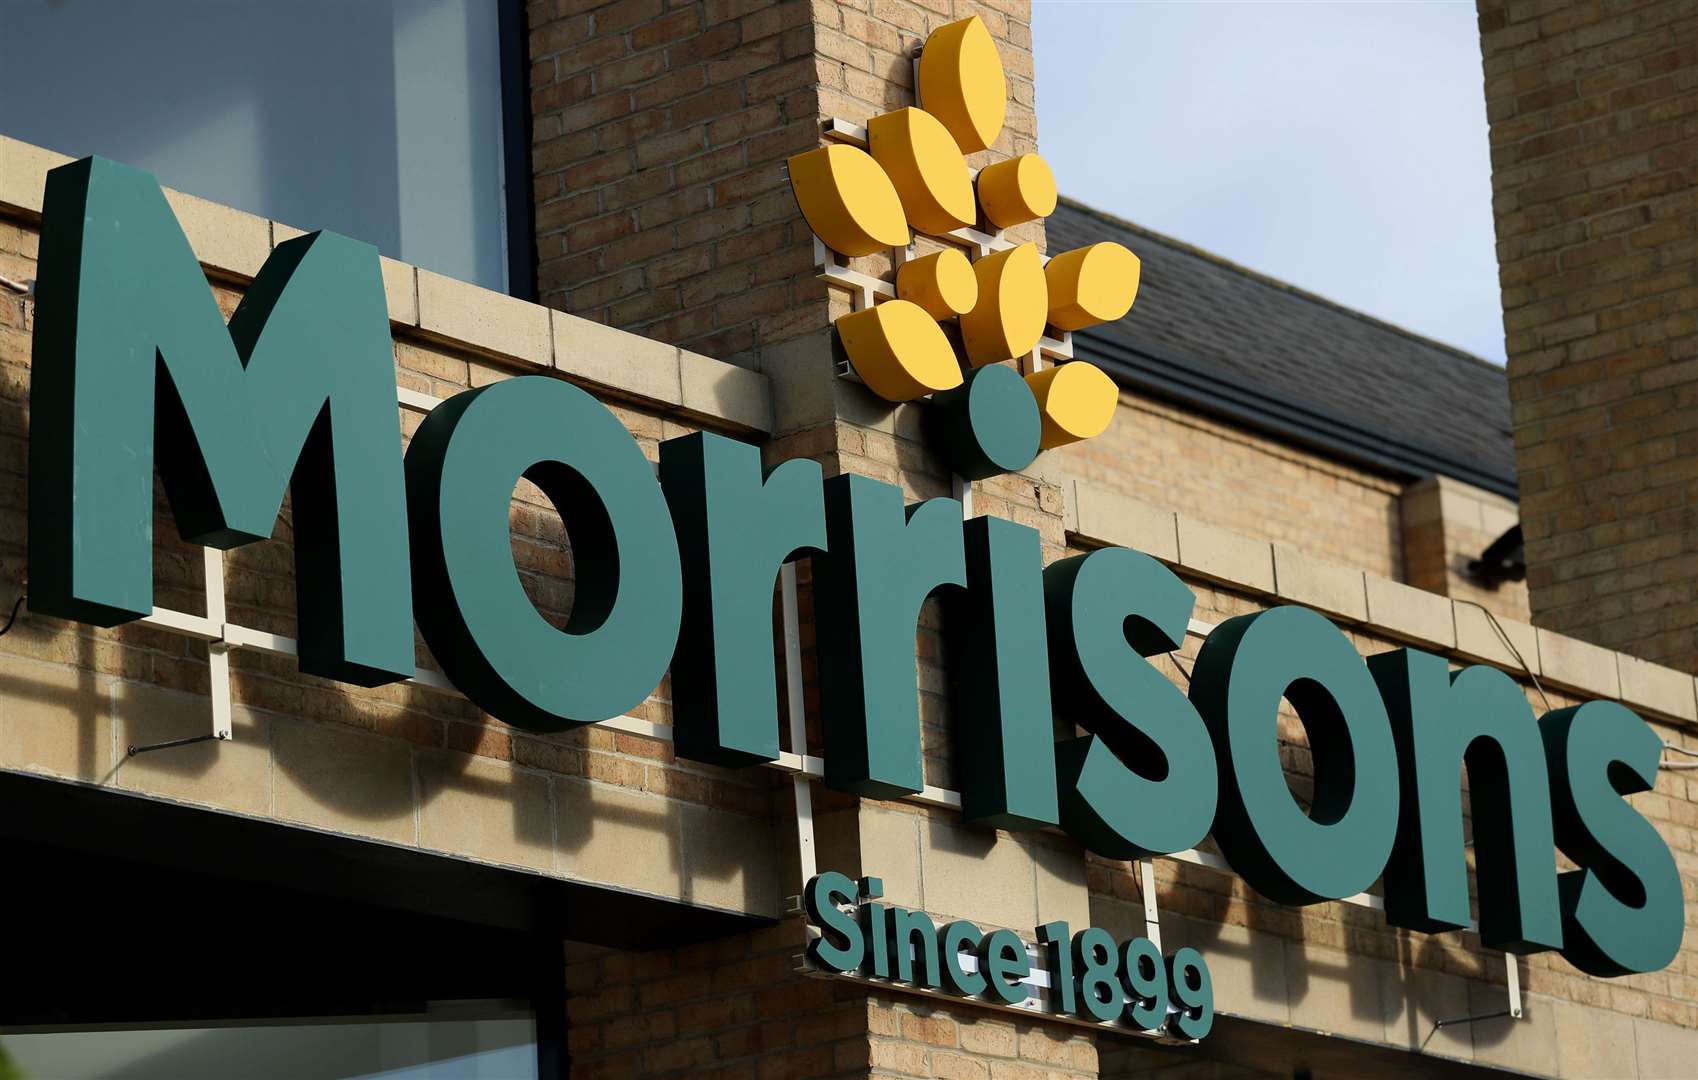 Morrisons is offering a £35 box of home and food essentials